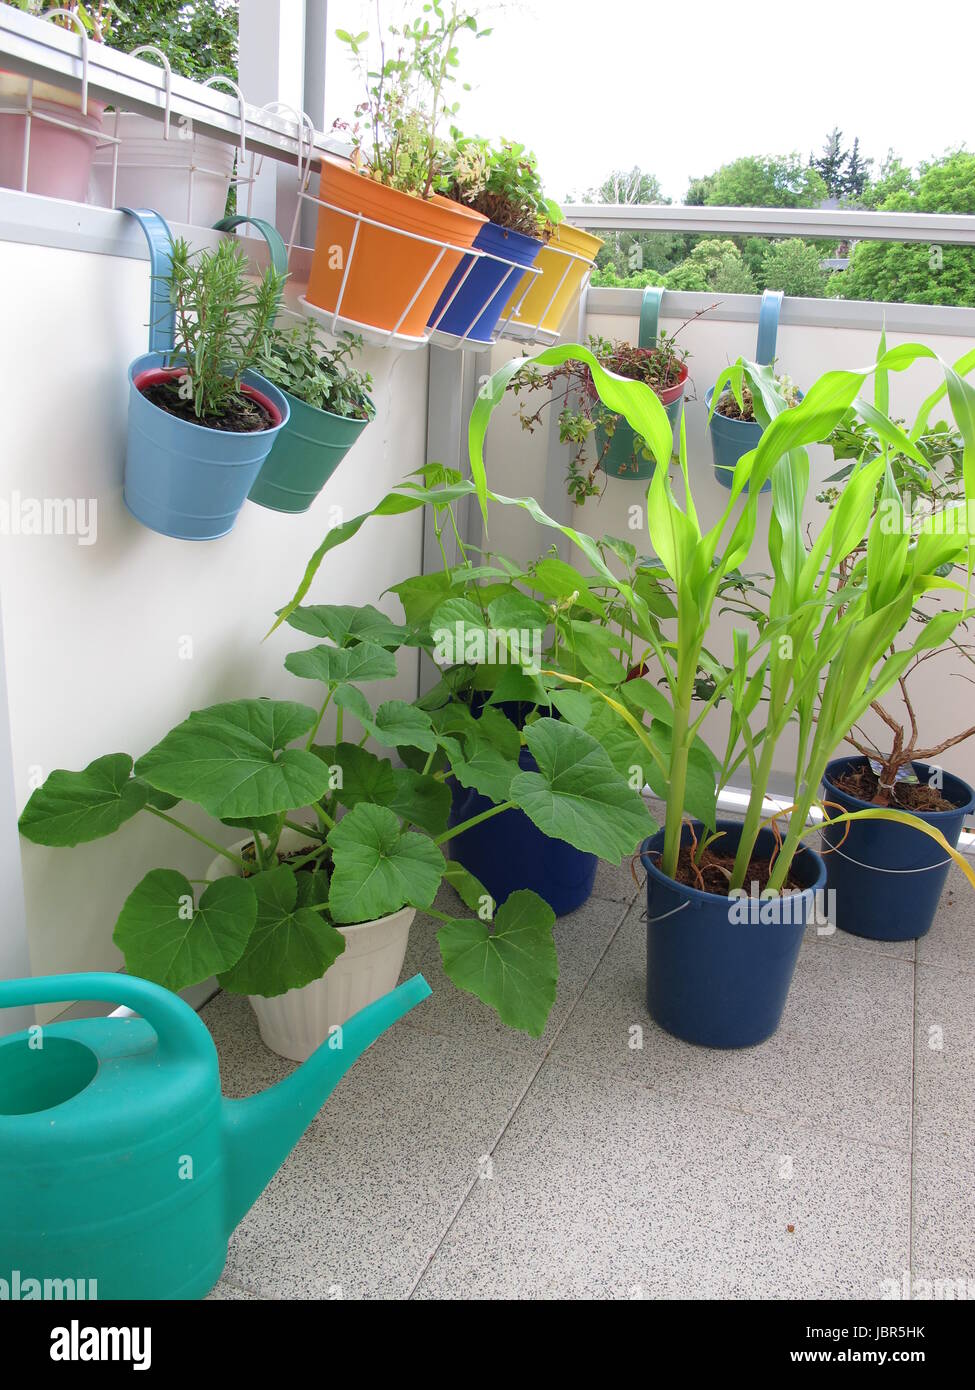 vegetable plants in pots on the balcony Stock Photo